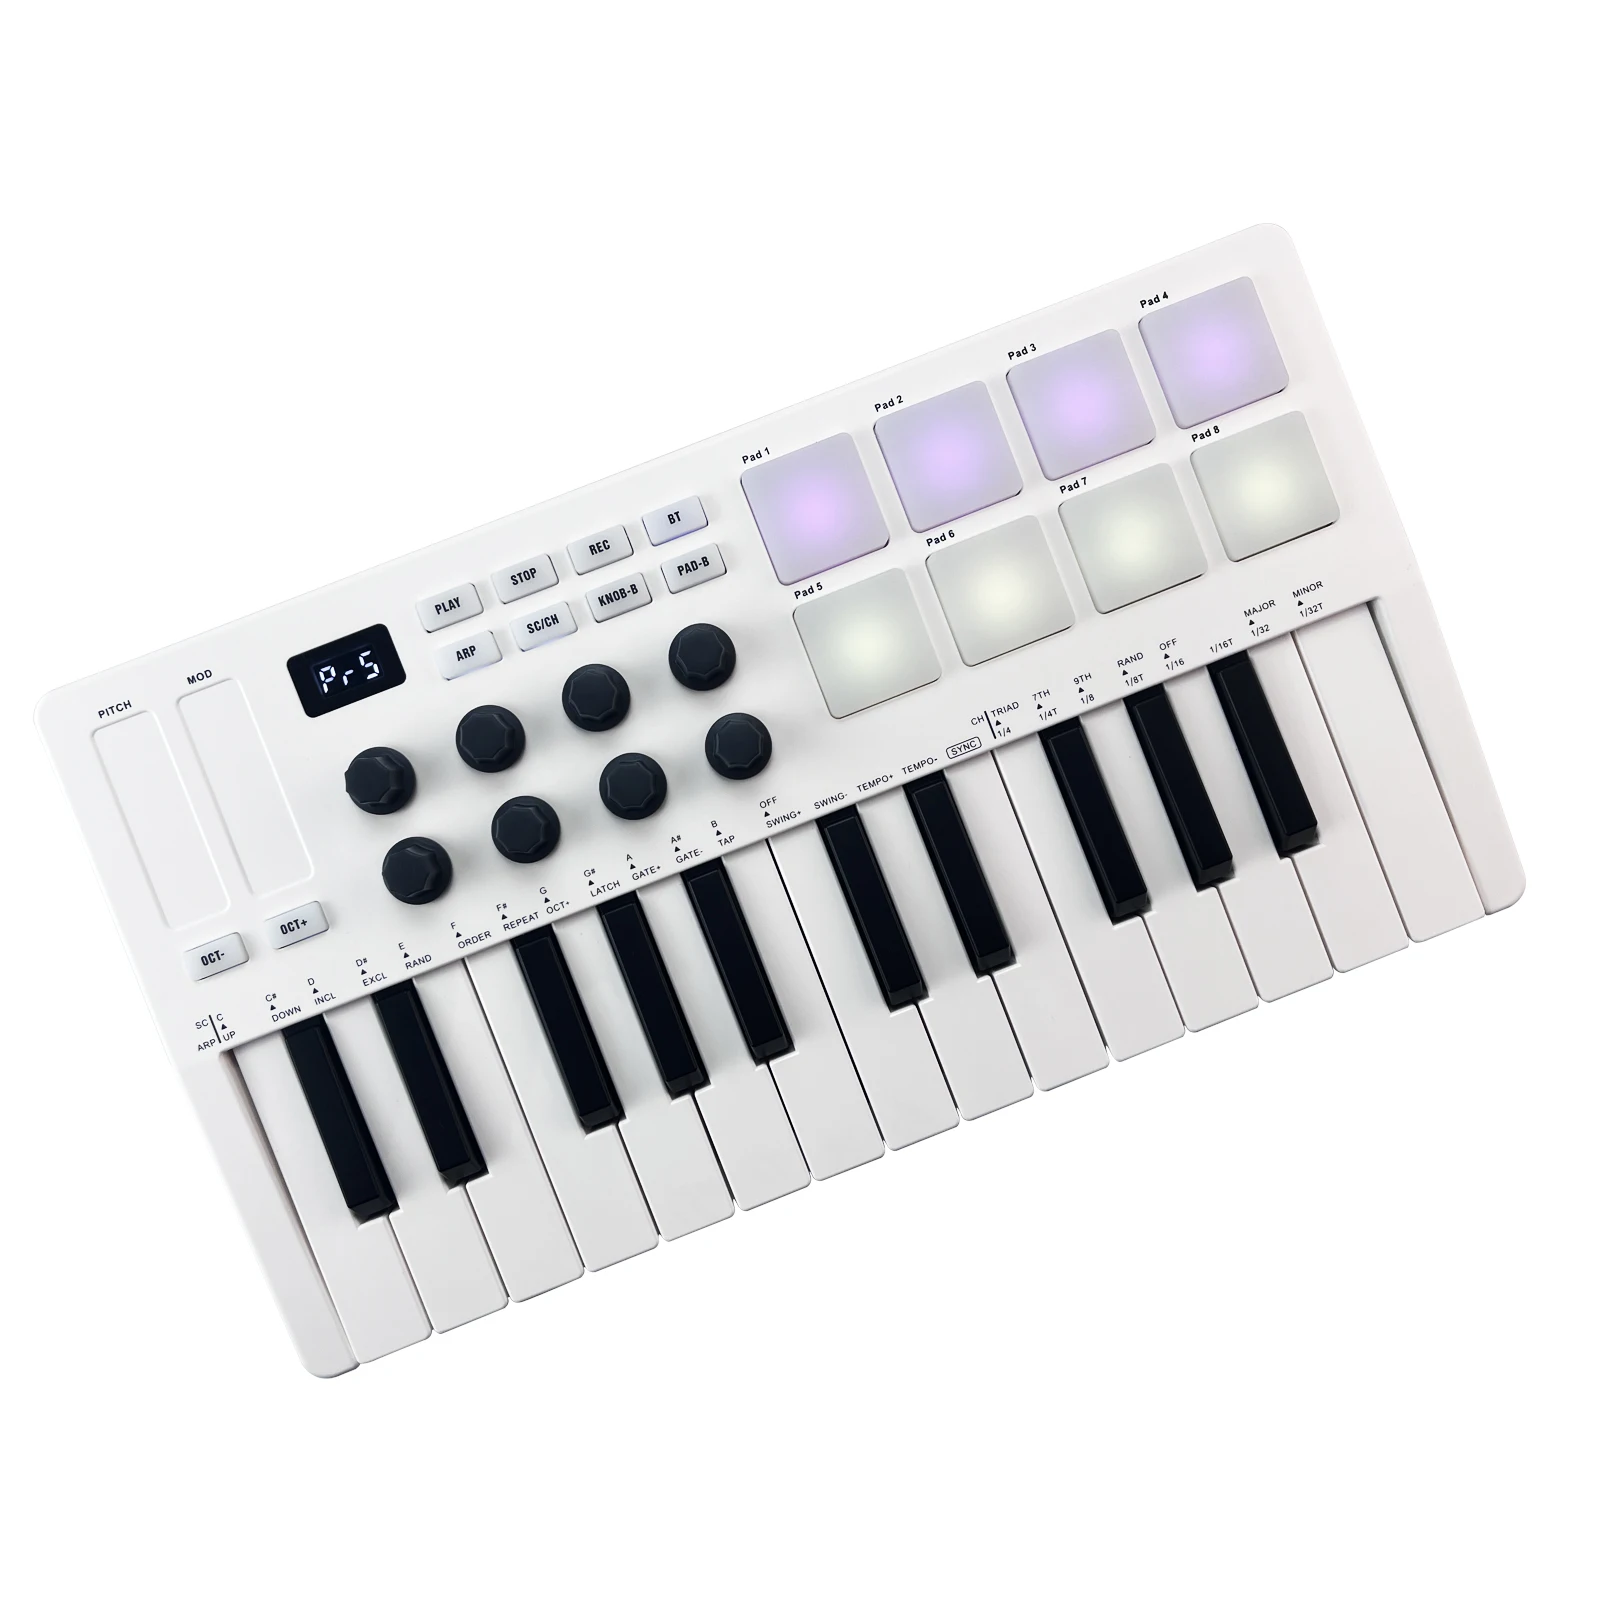 M-vave Mini 25 Keys Wireless / USB MIDI Keyboard Controller With 8 Backlit Drum Pads, 8 Knobs and 2 Touch Stripes SMK-25 enlarge